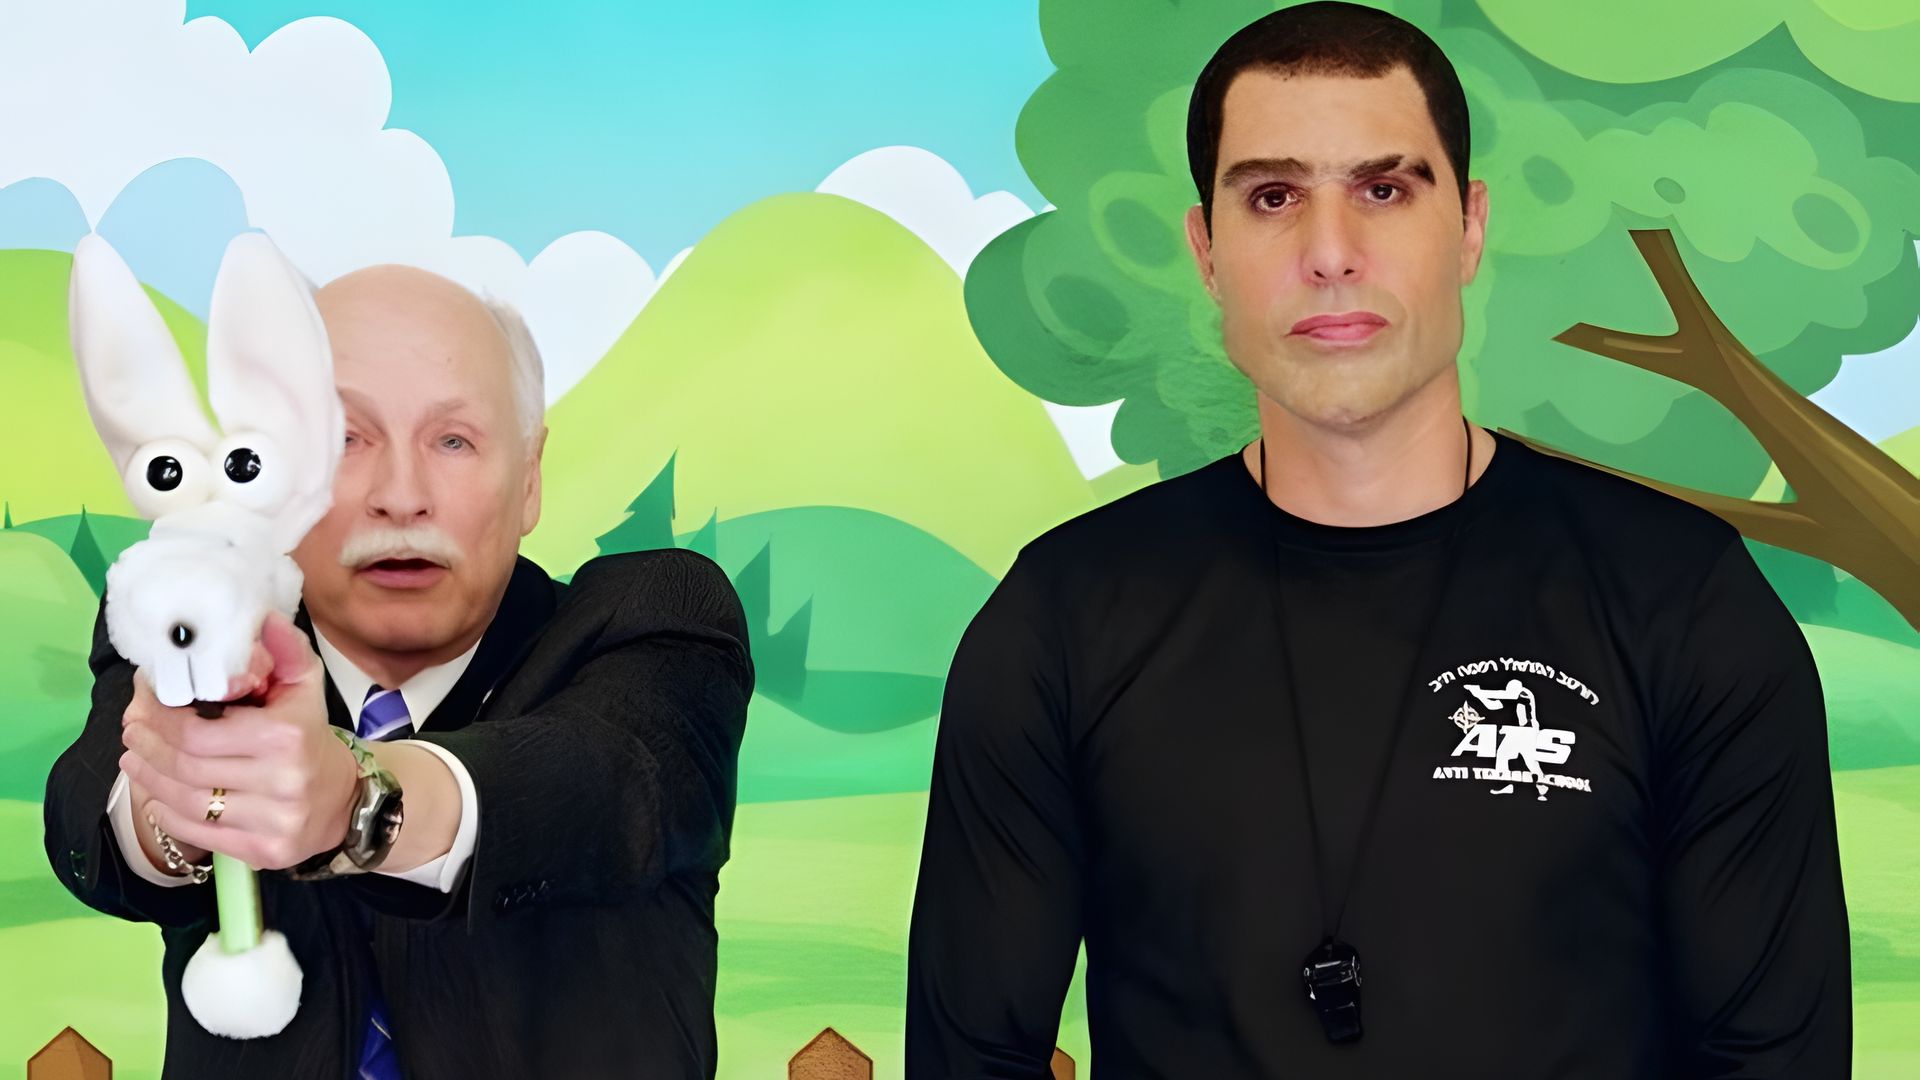 Sacha Baron Cohen got his start with comedy sketches on TV